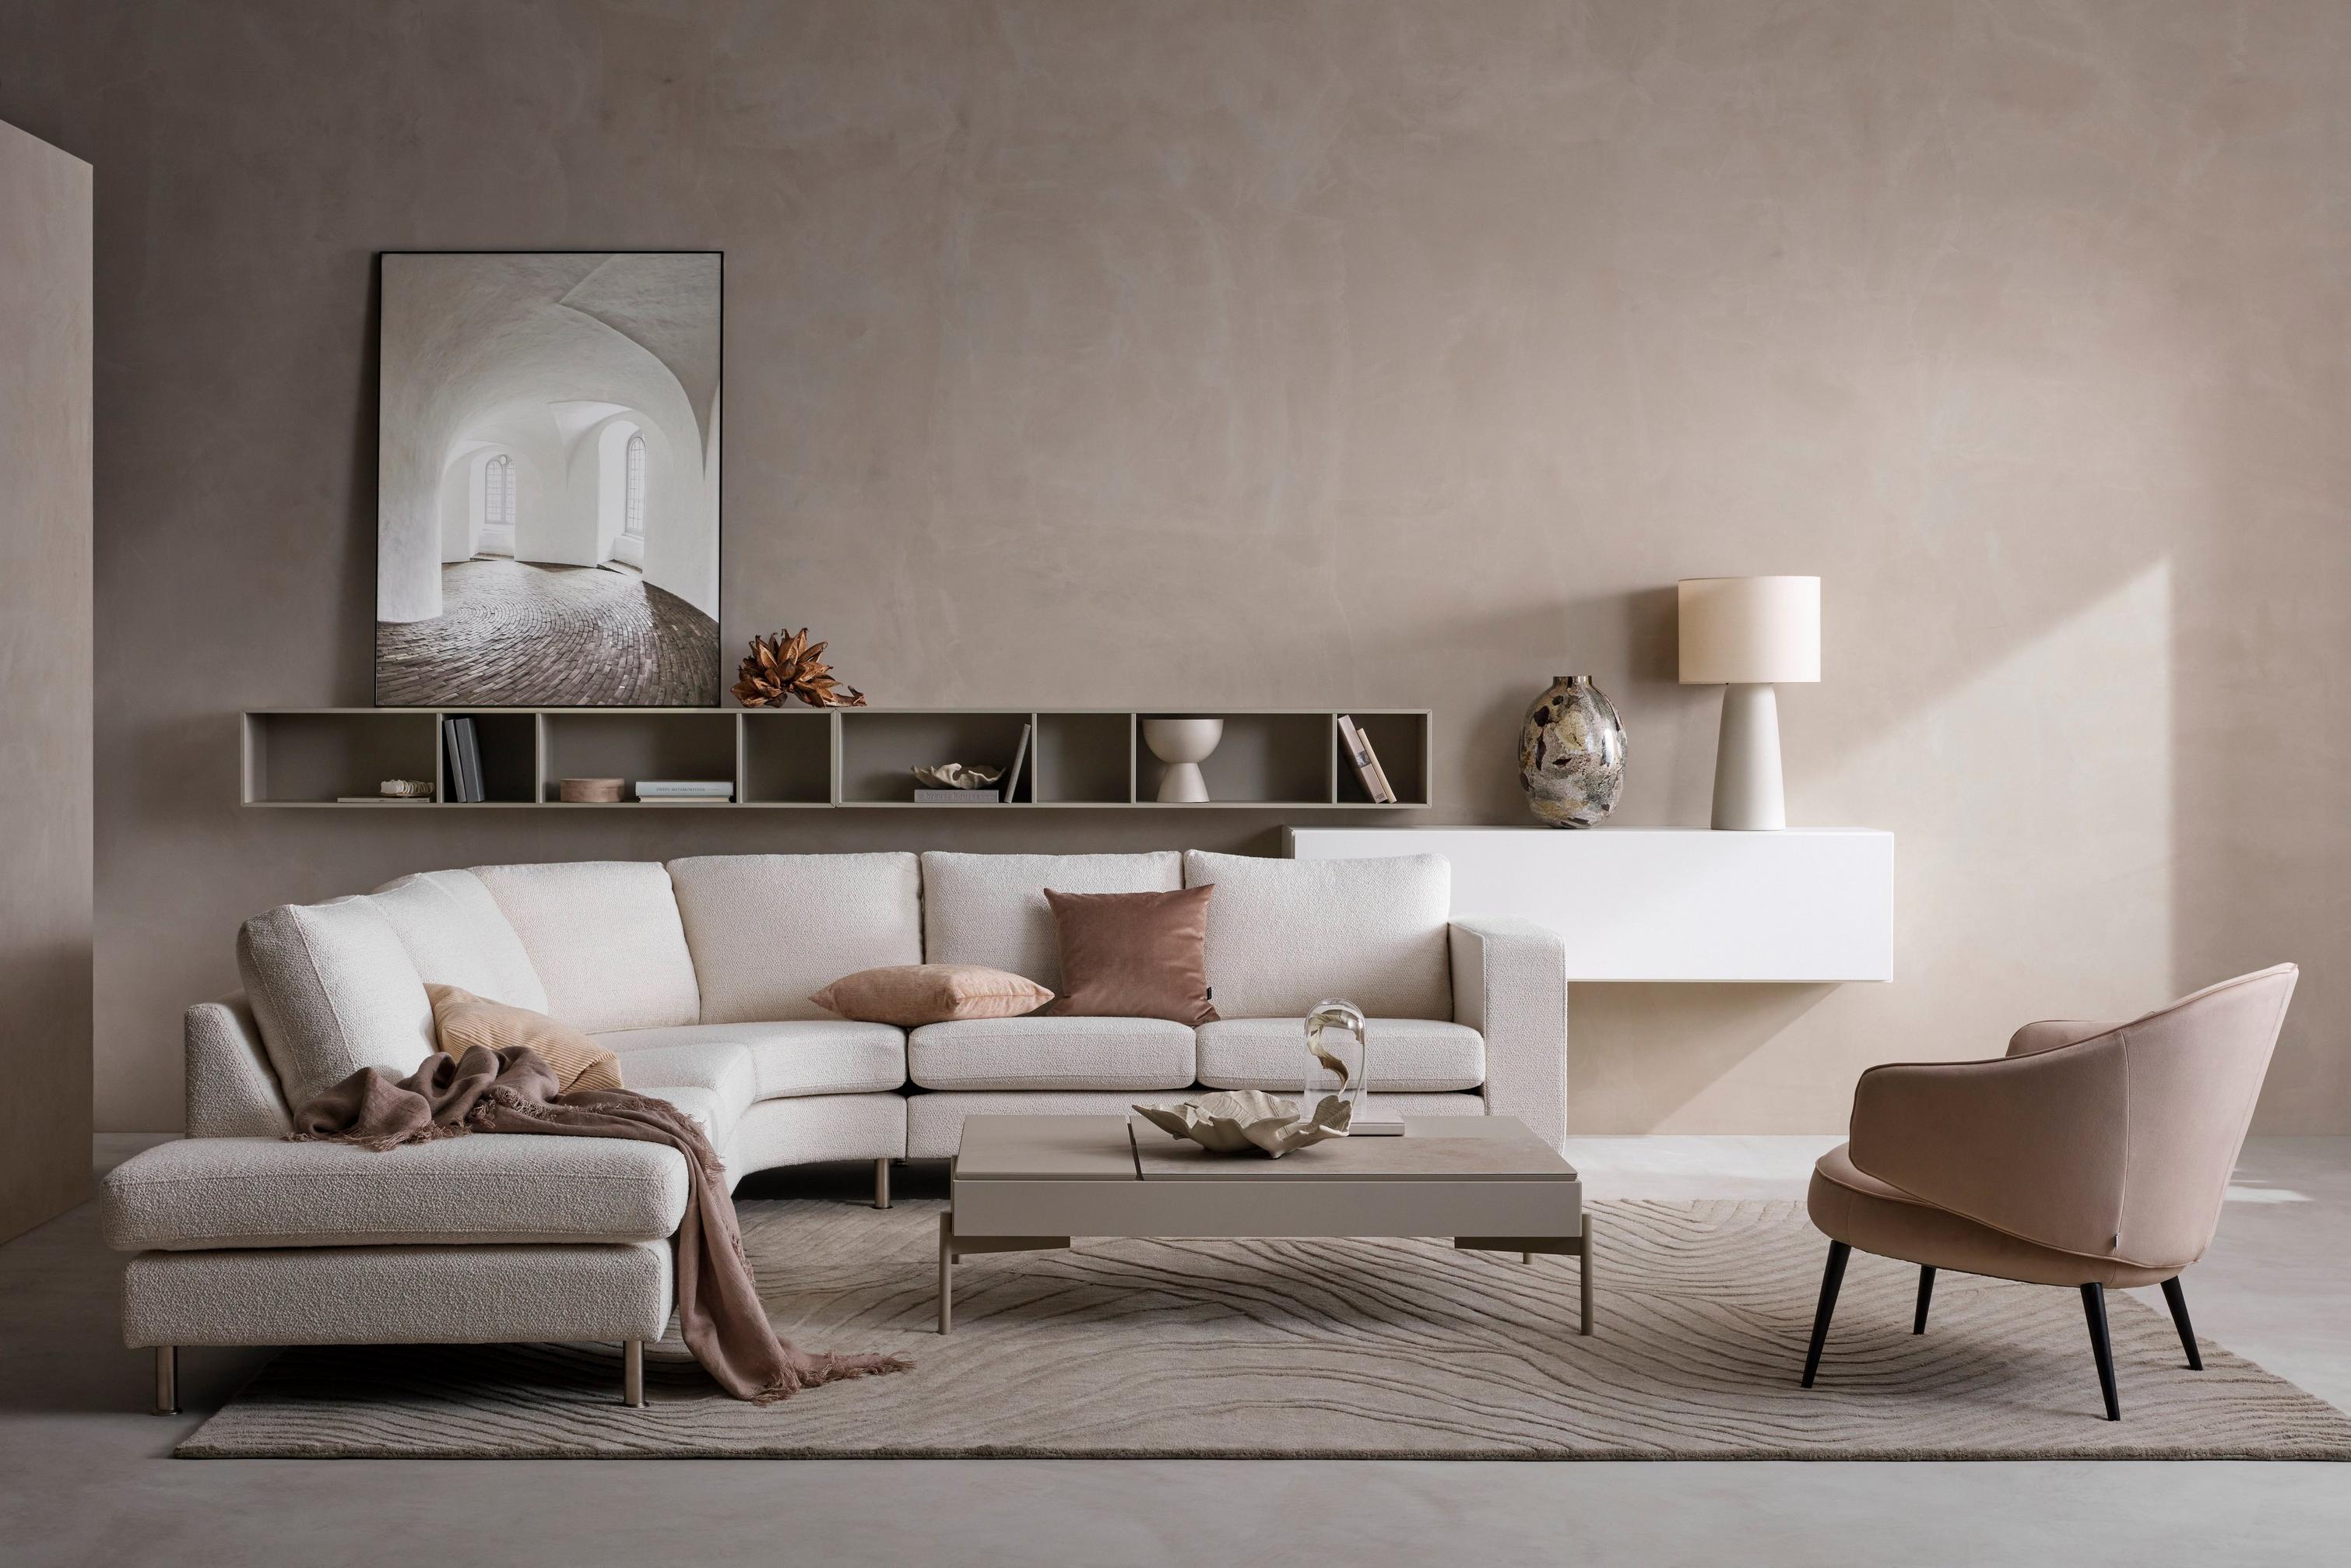 The Indivi sofa with round resting unit in beige Lazio farbic with the Chiva coffee table with storage.